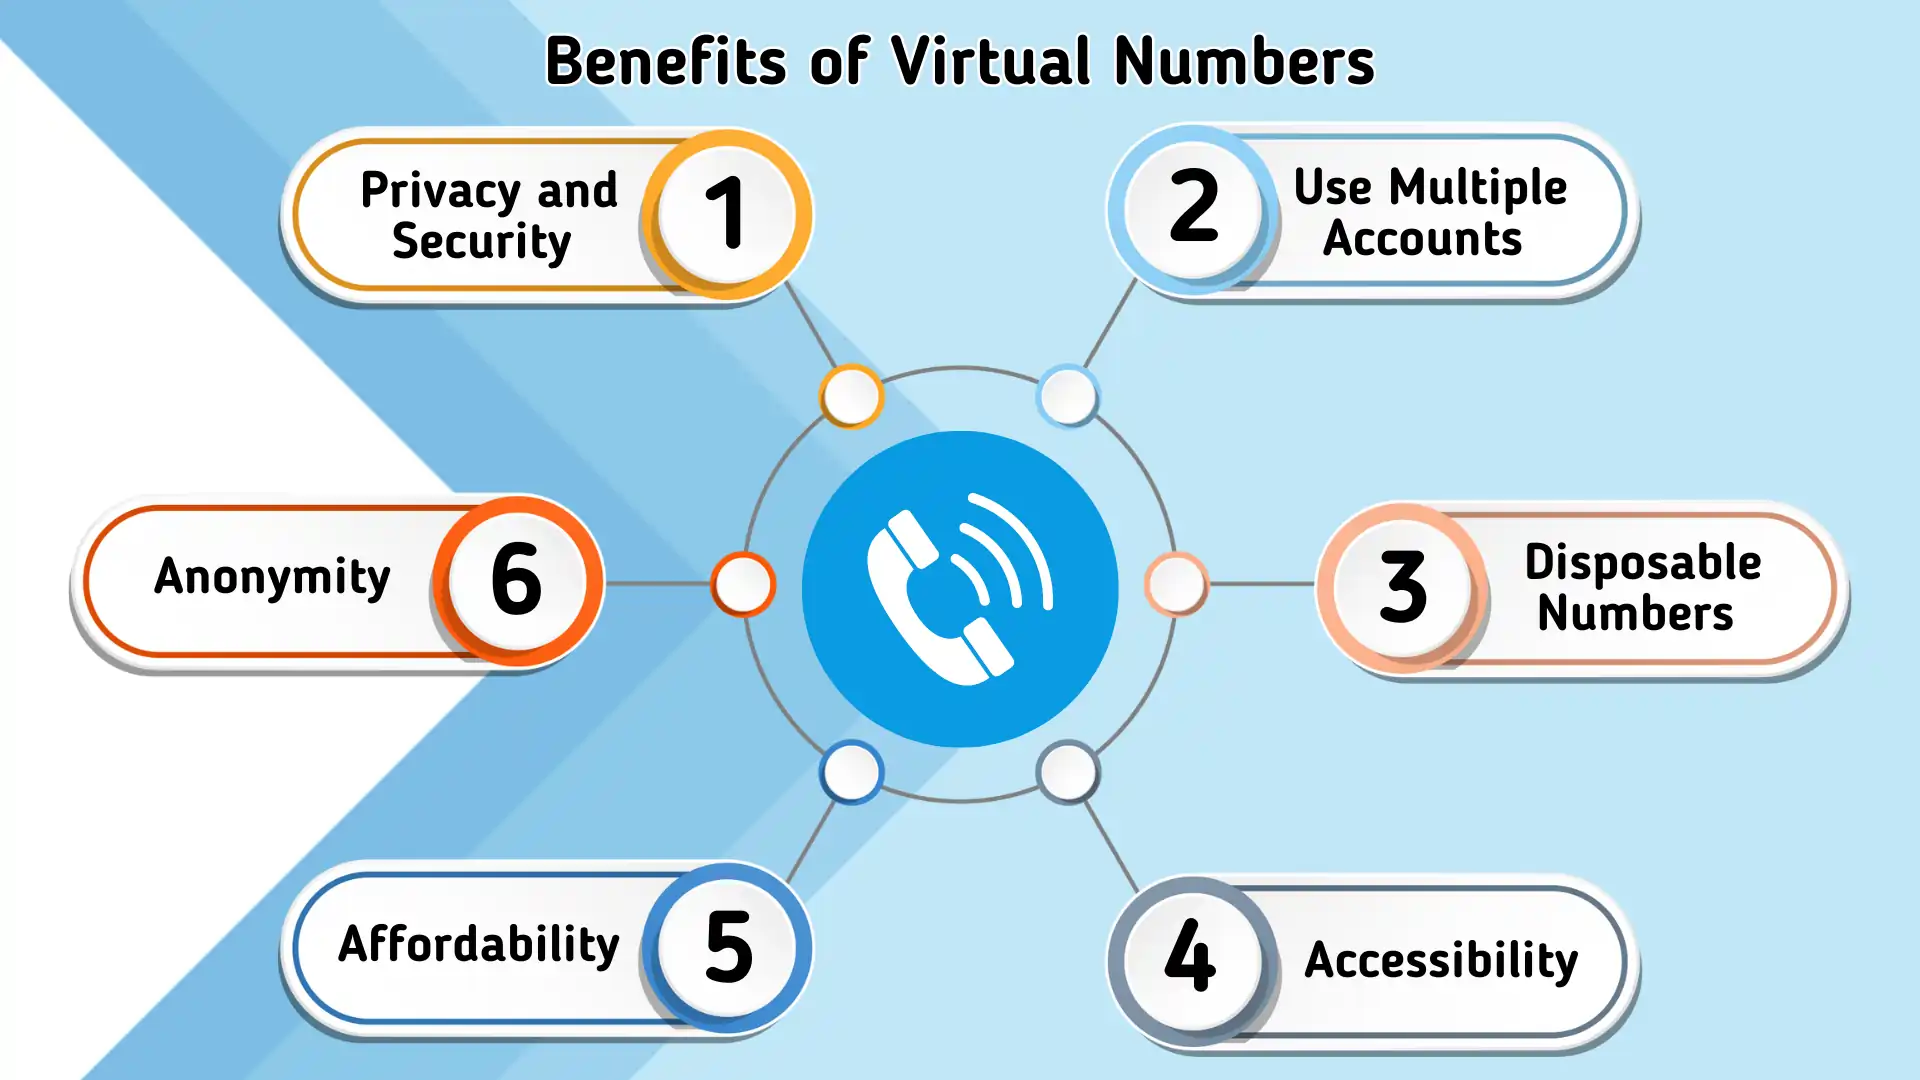 Benefits of Virtual Numbers